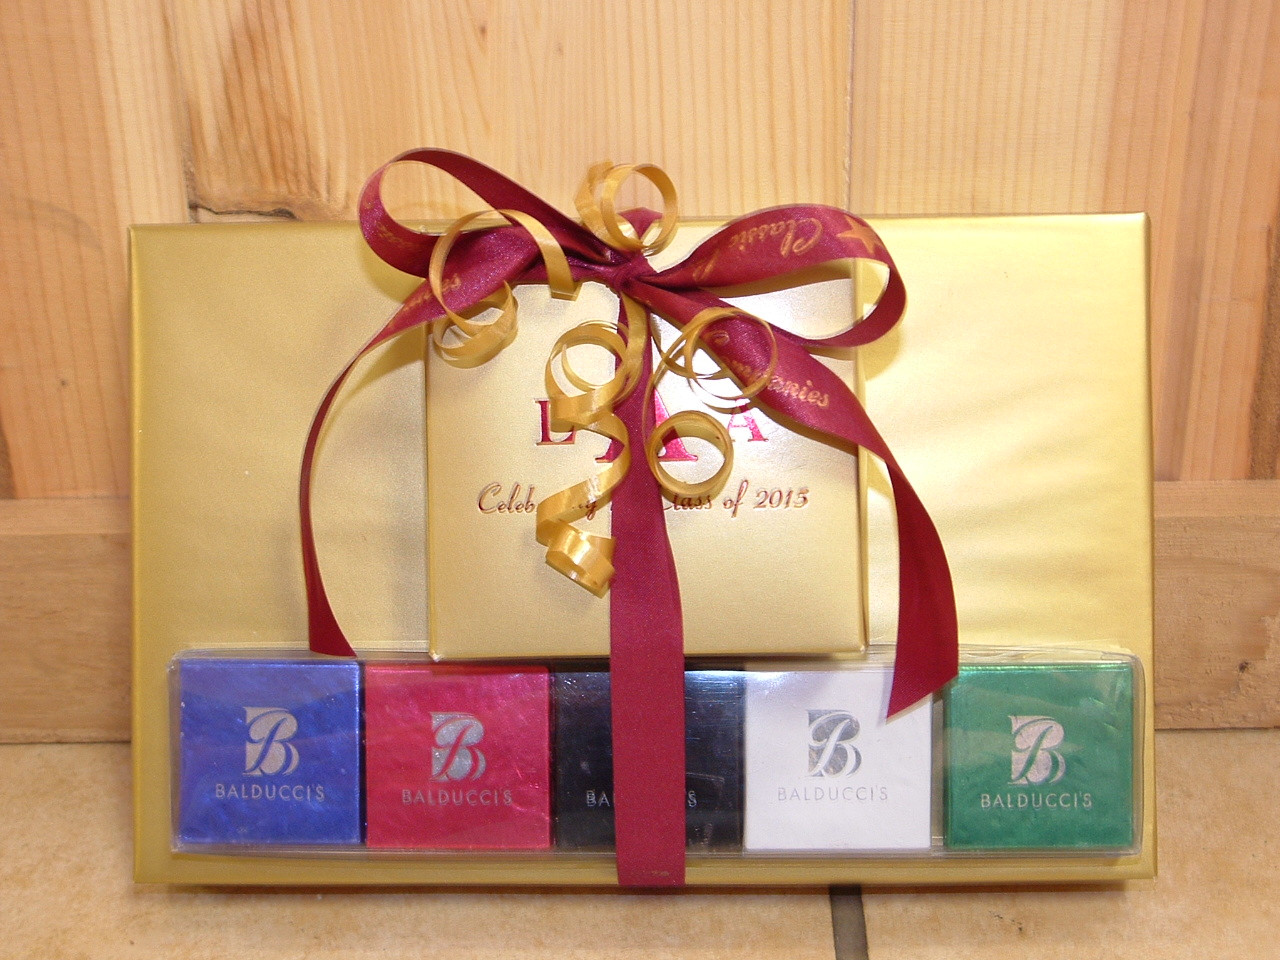 Corporate Holiday Gift Ideas
 Great Corporate Holiday Gift Ideas of Chocolate and or